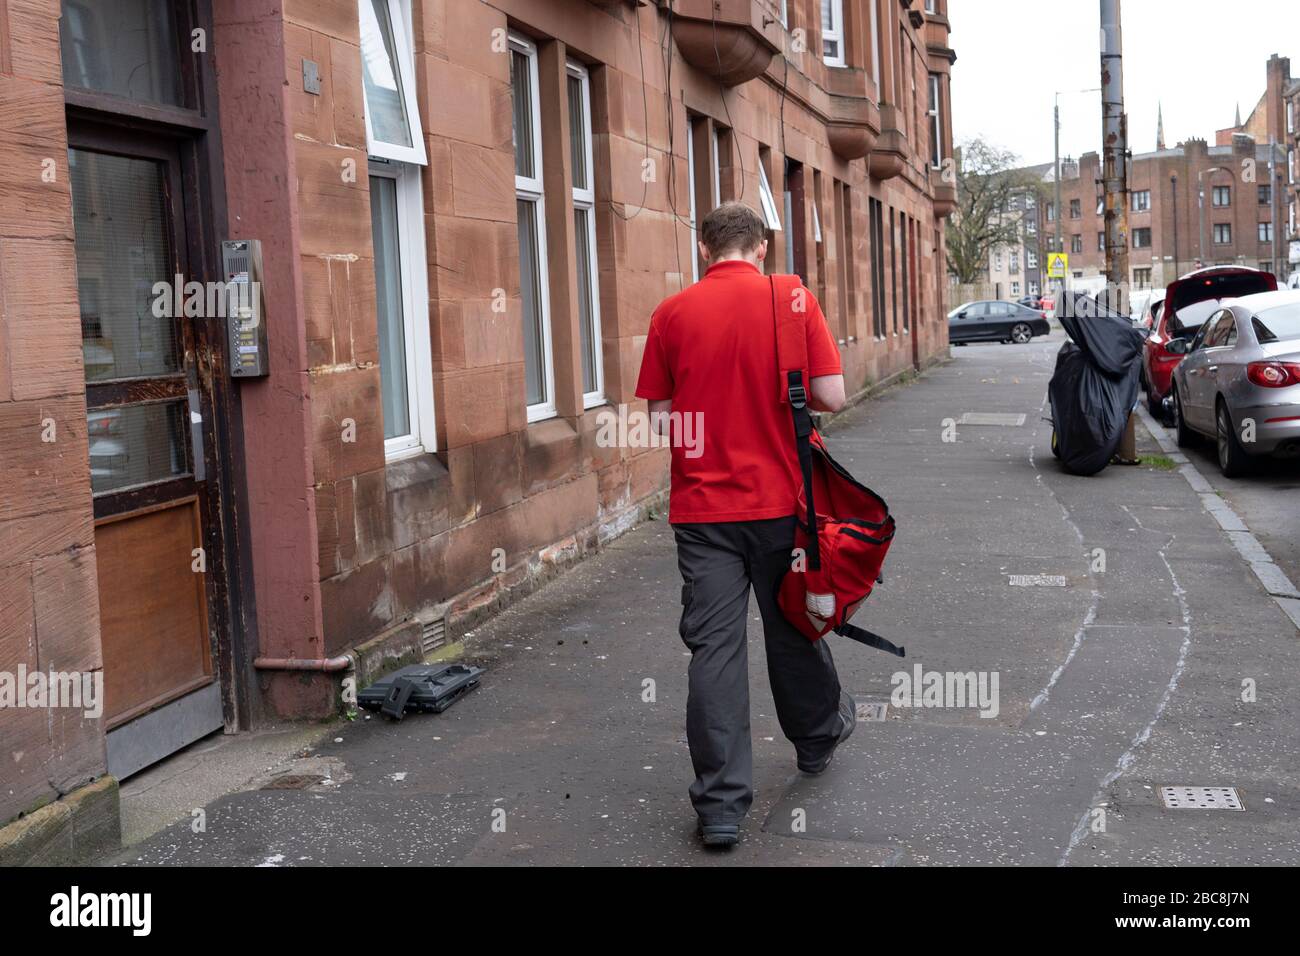 Glasgow, Scotland, UK. 3 April, 2020. Images from the south side of Glasgow at the end of the second week of Coronavirus lockdown. Pictured; Royal Mail postman making deliveries to tenement in Govanhill . Iain Masterton/Alamy Live News Stock Photo